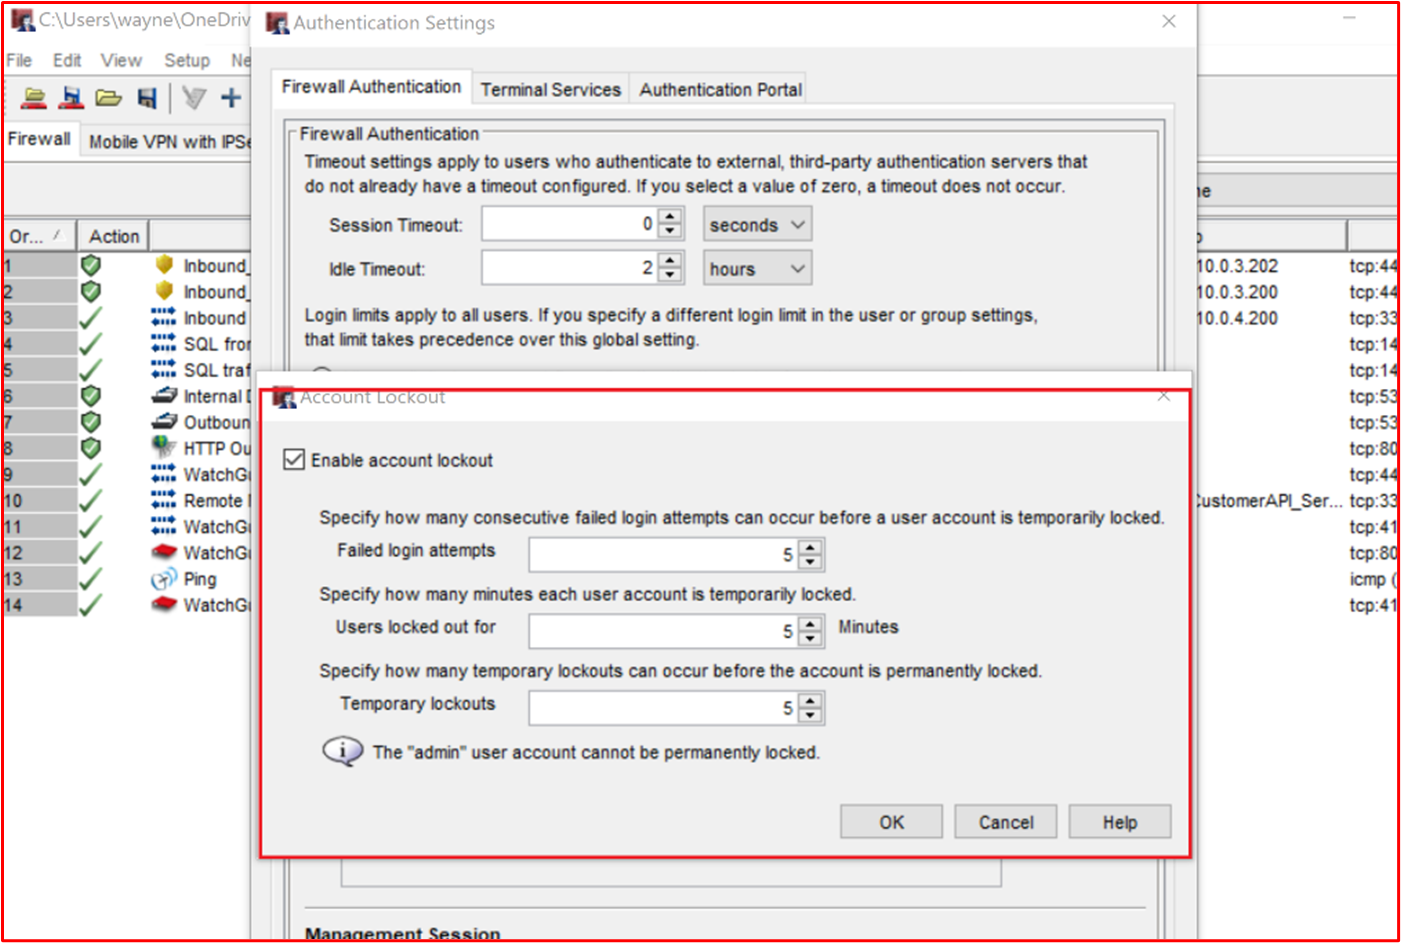 Account Lockout settings for a WatchGuard Firewall